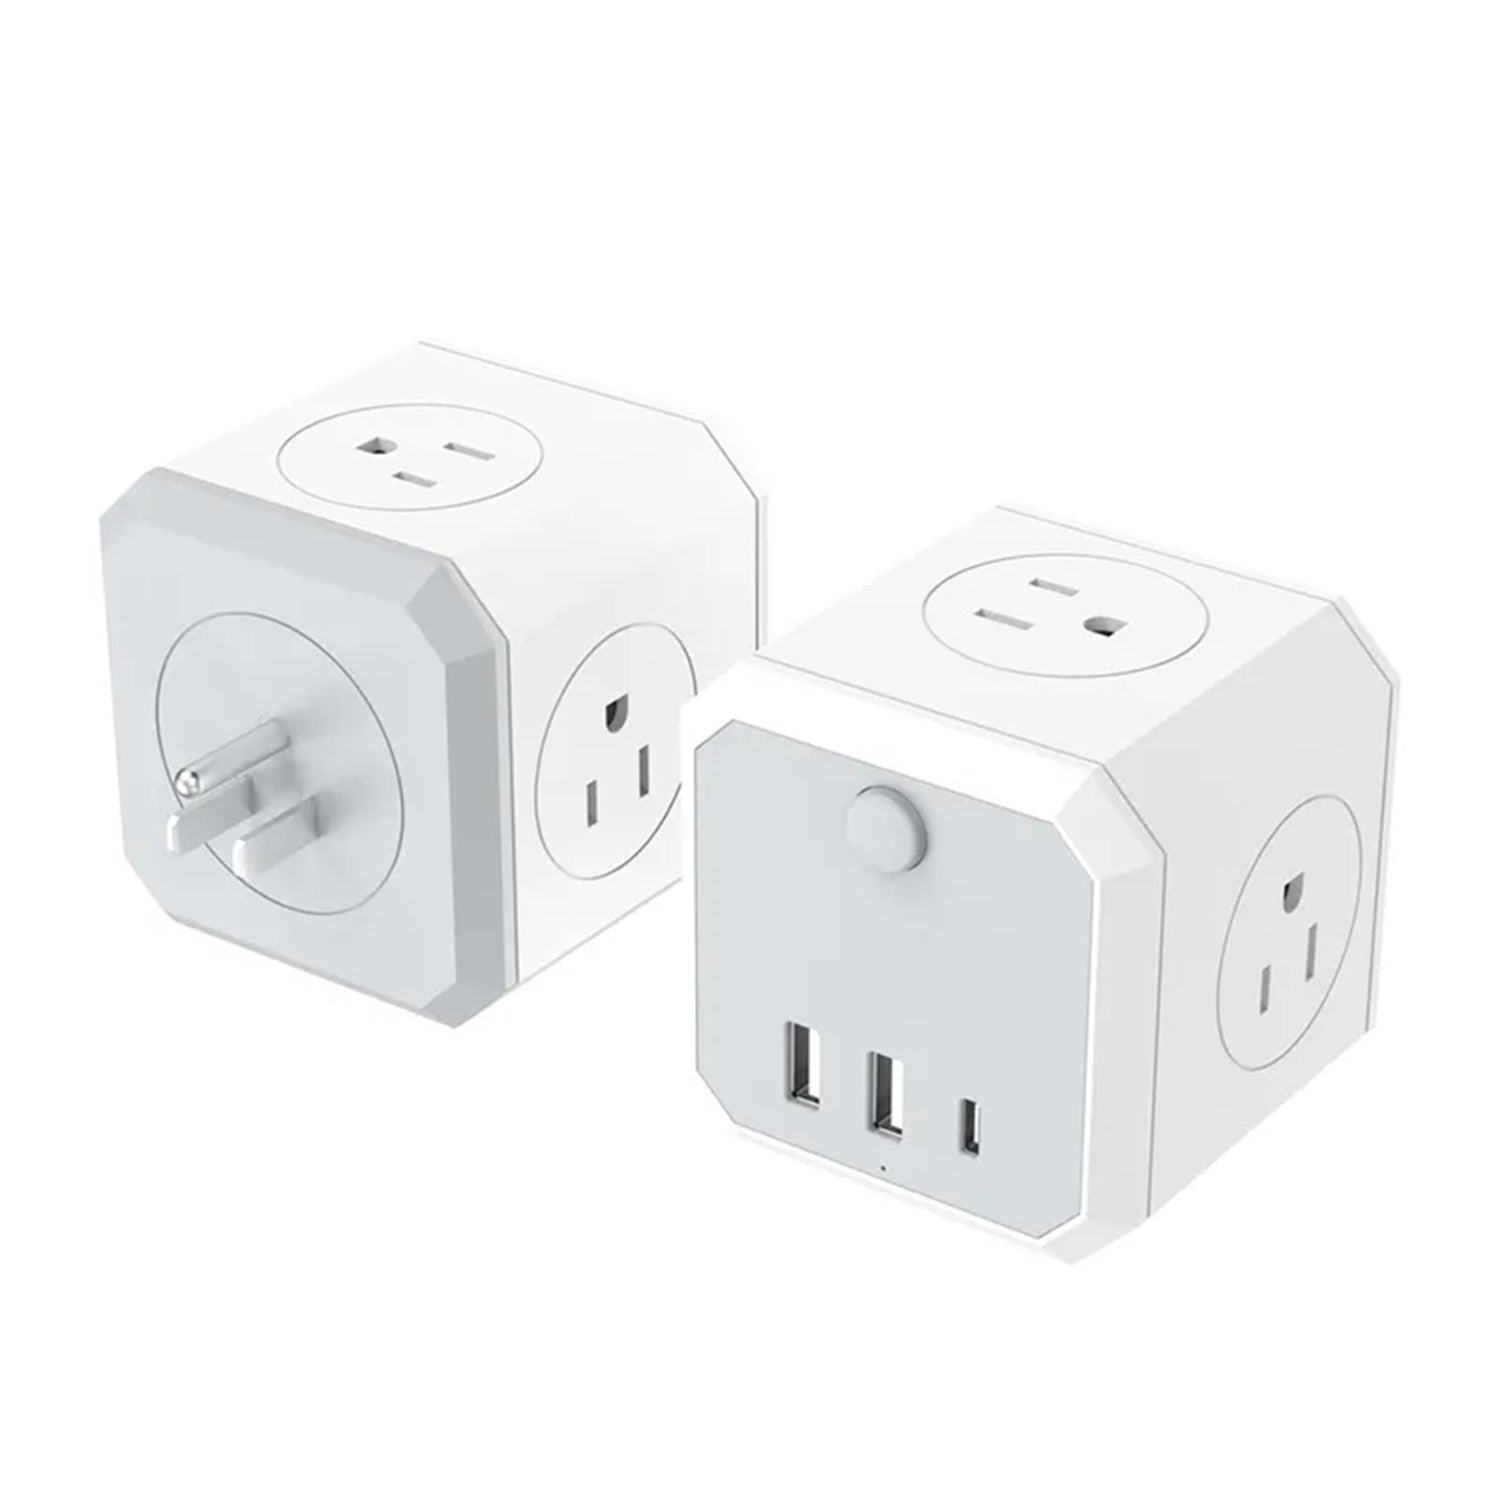 3 USB Ports 4-Sided Socket Power Fast Charging Adapter-White